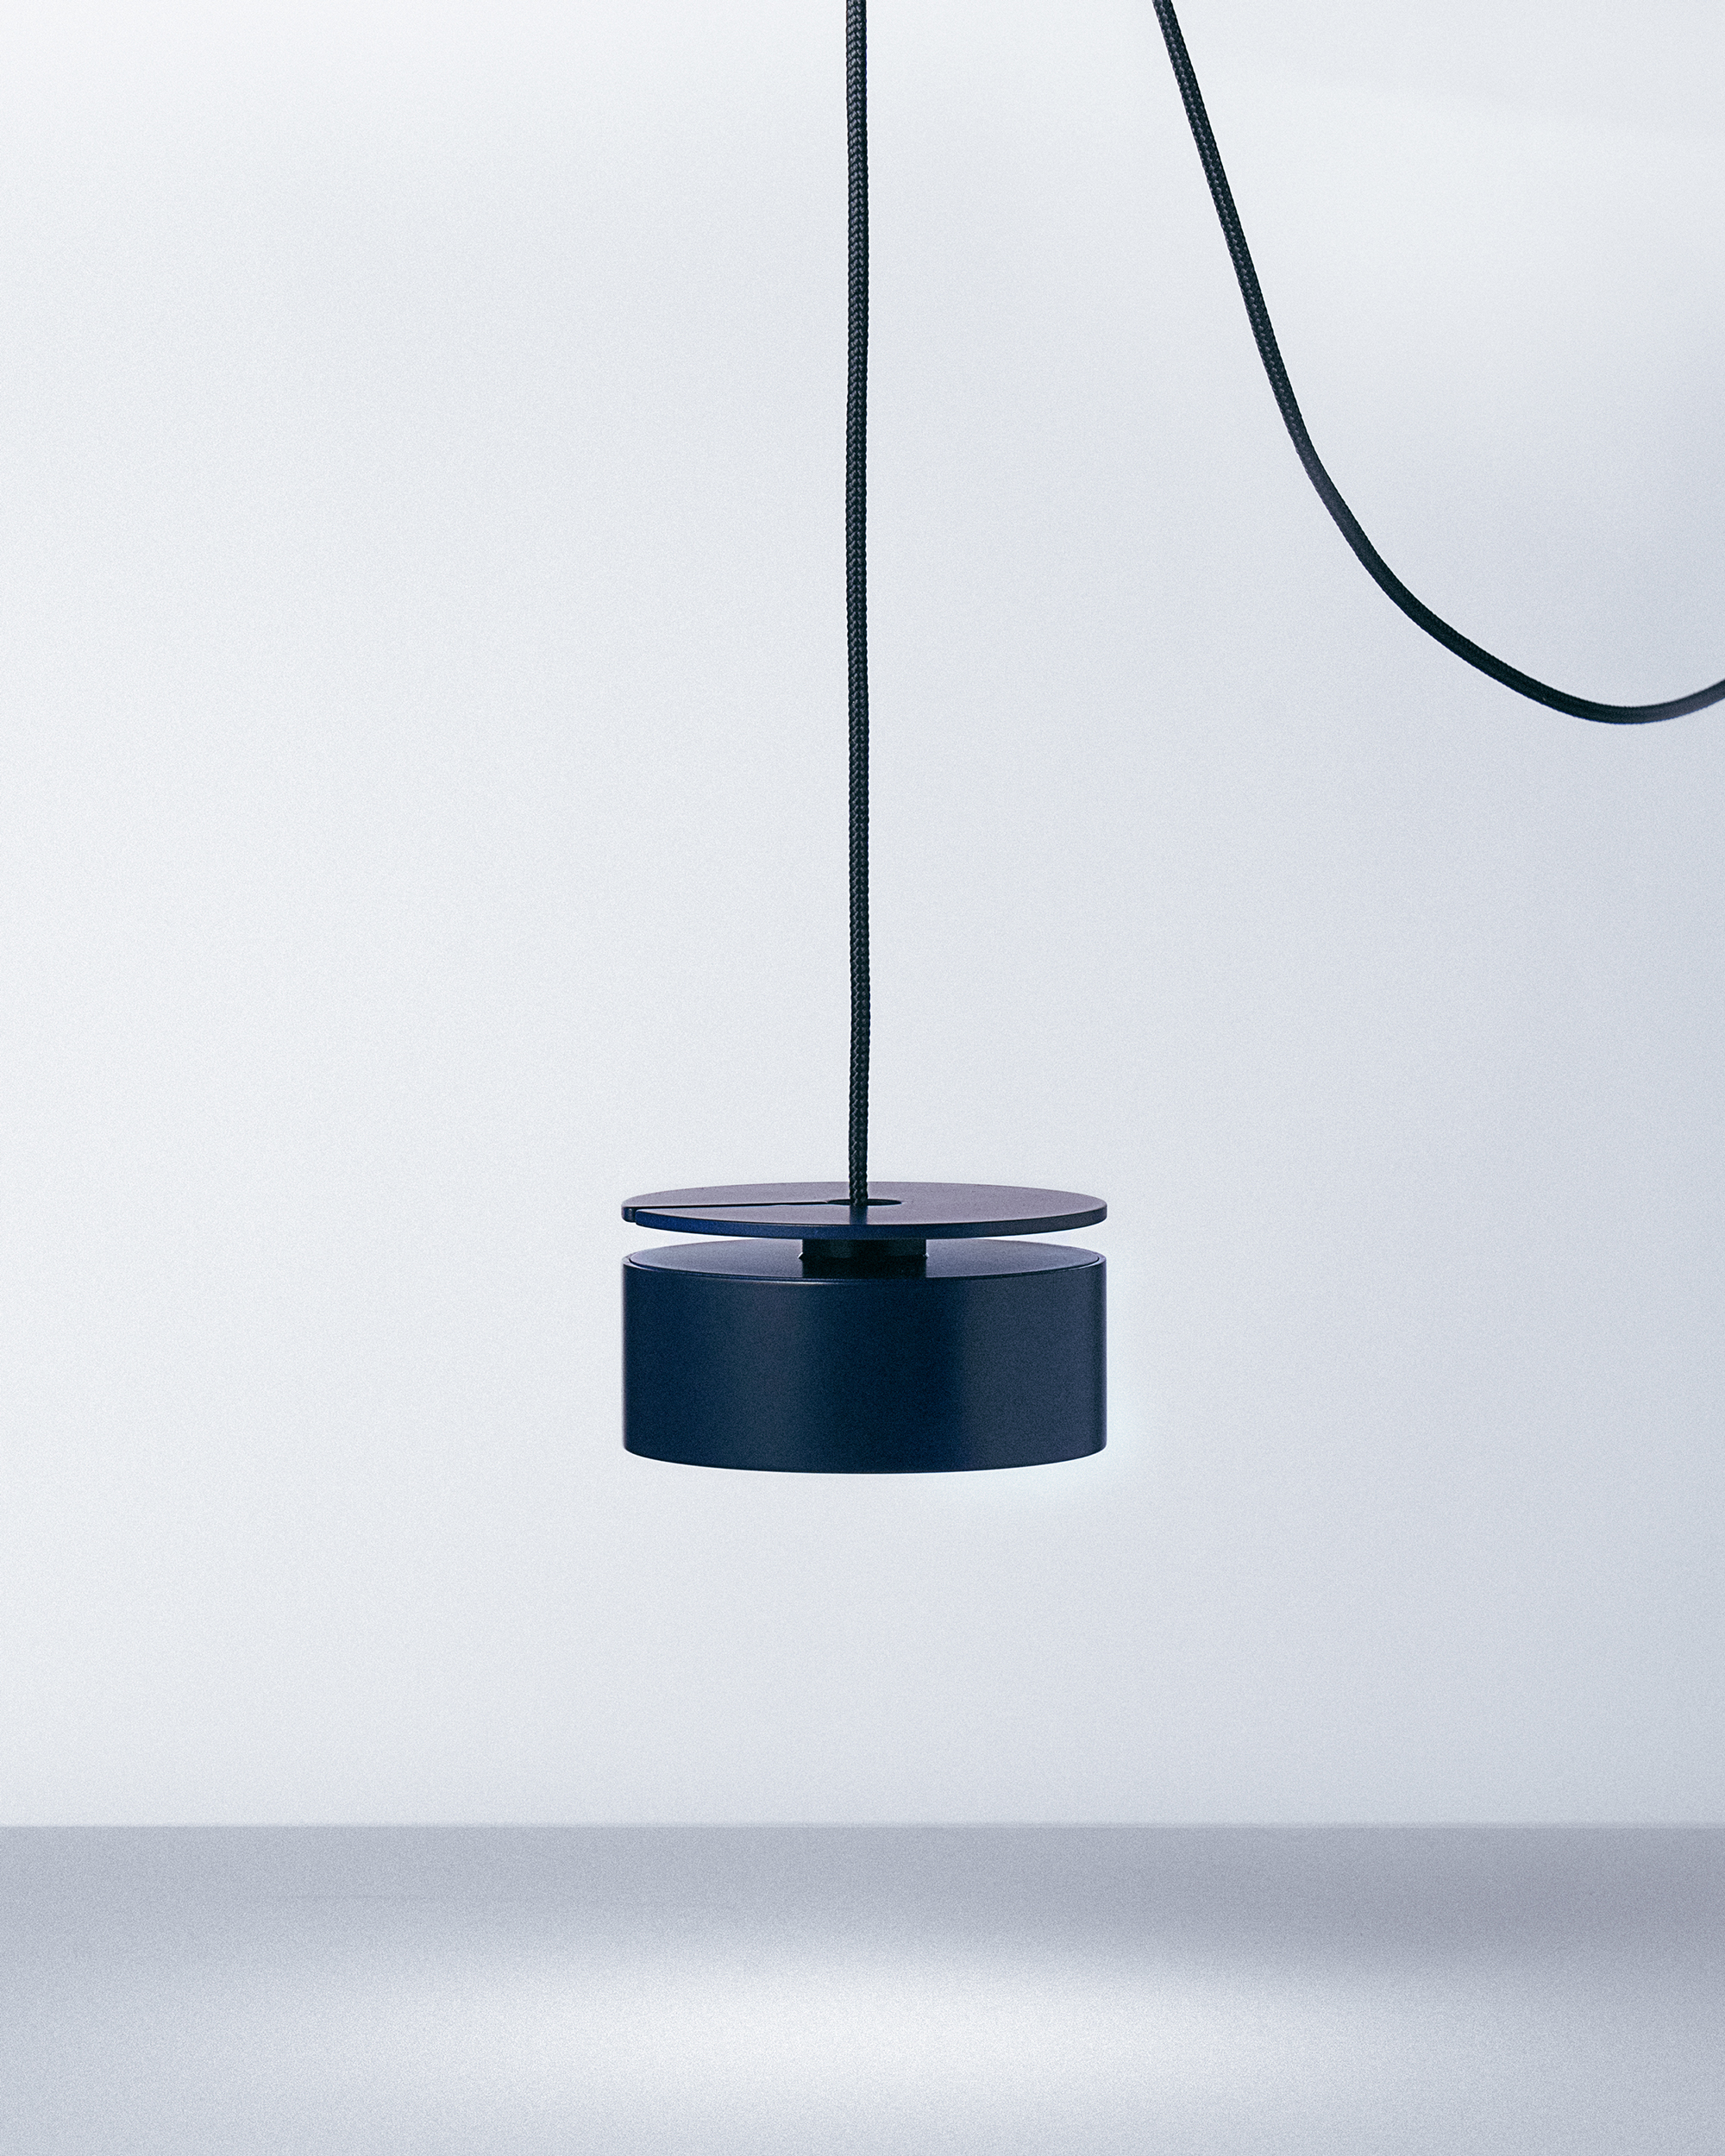 ECAL and Schätti Unveil Innovative Portable Lamp Collection at Milan Design Week - Gessato